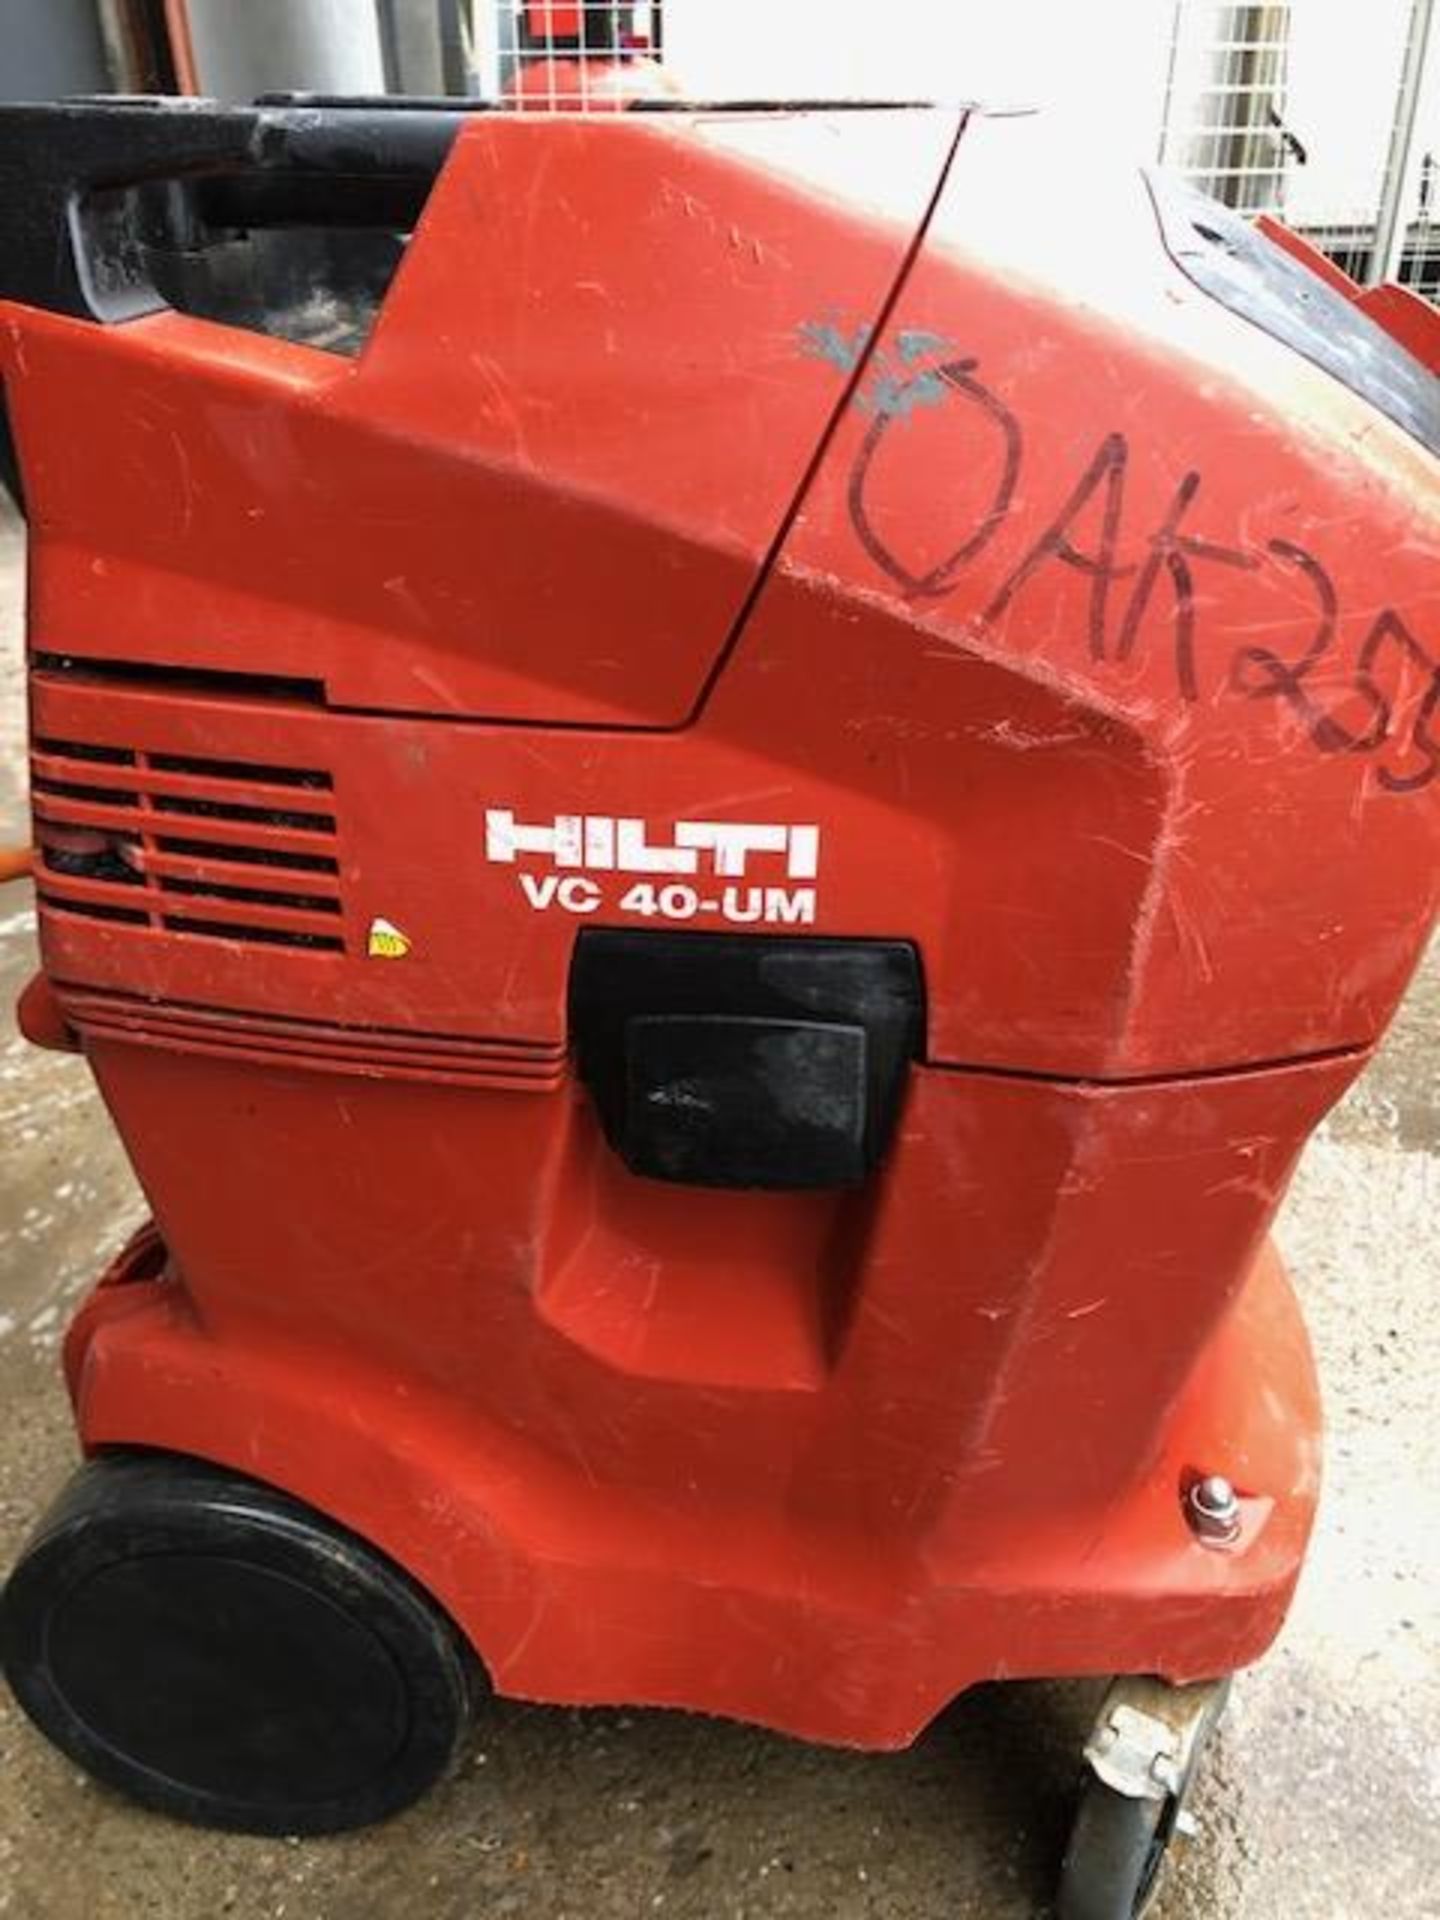 Hilti Vc 40-Um Wet And Dr - Image 2 of 3